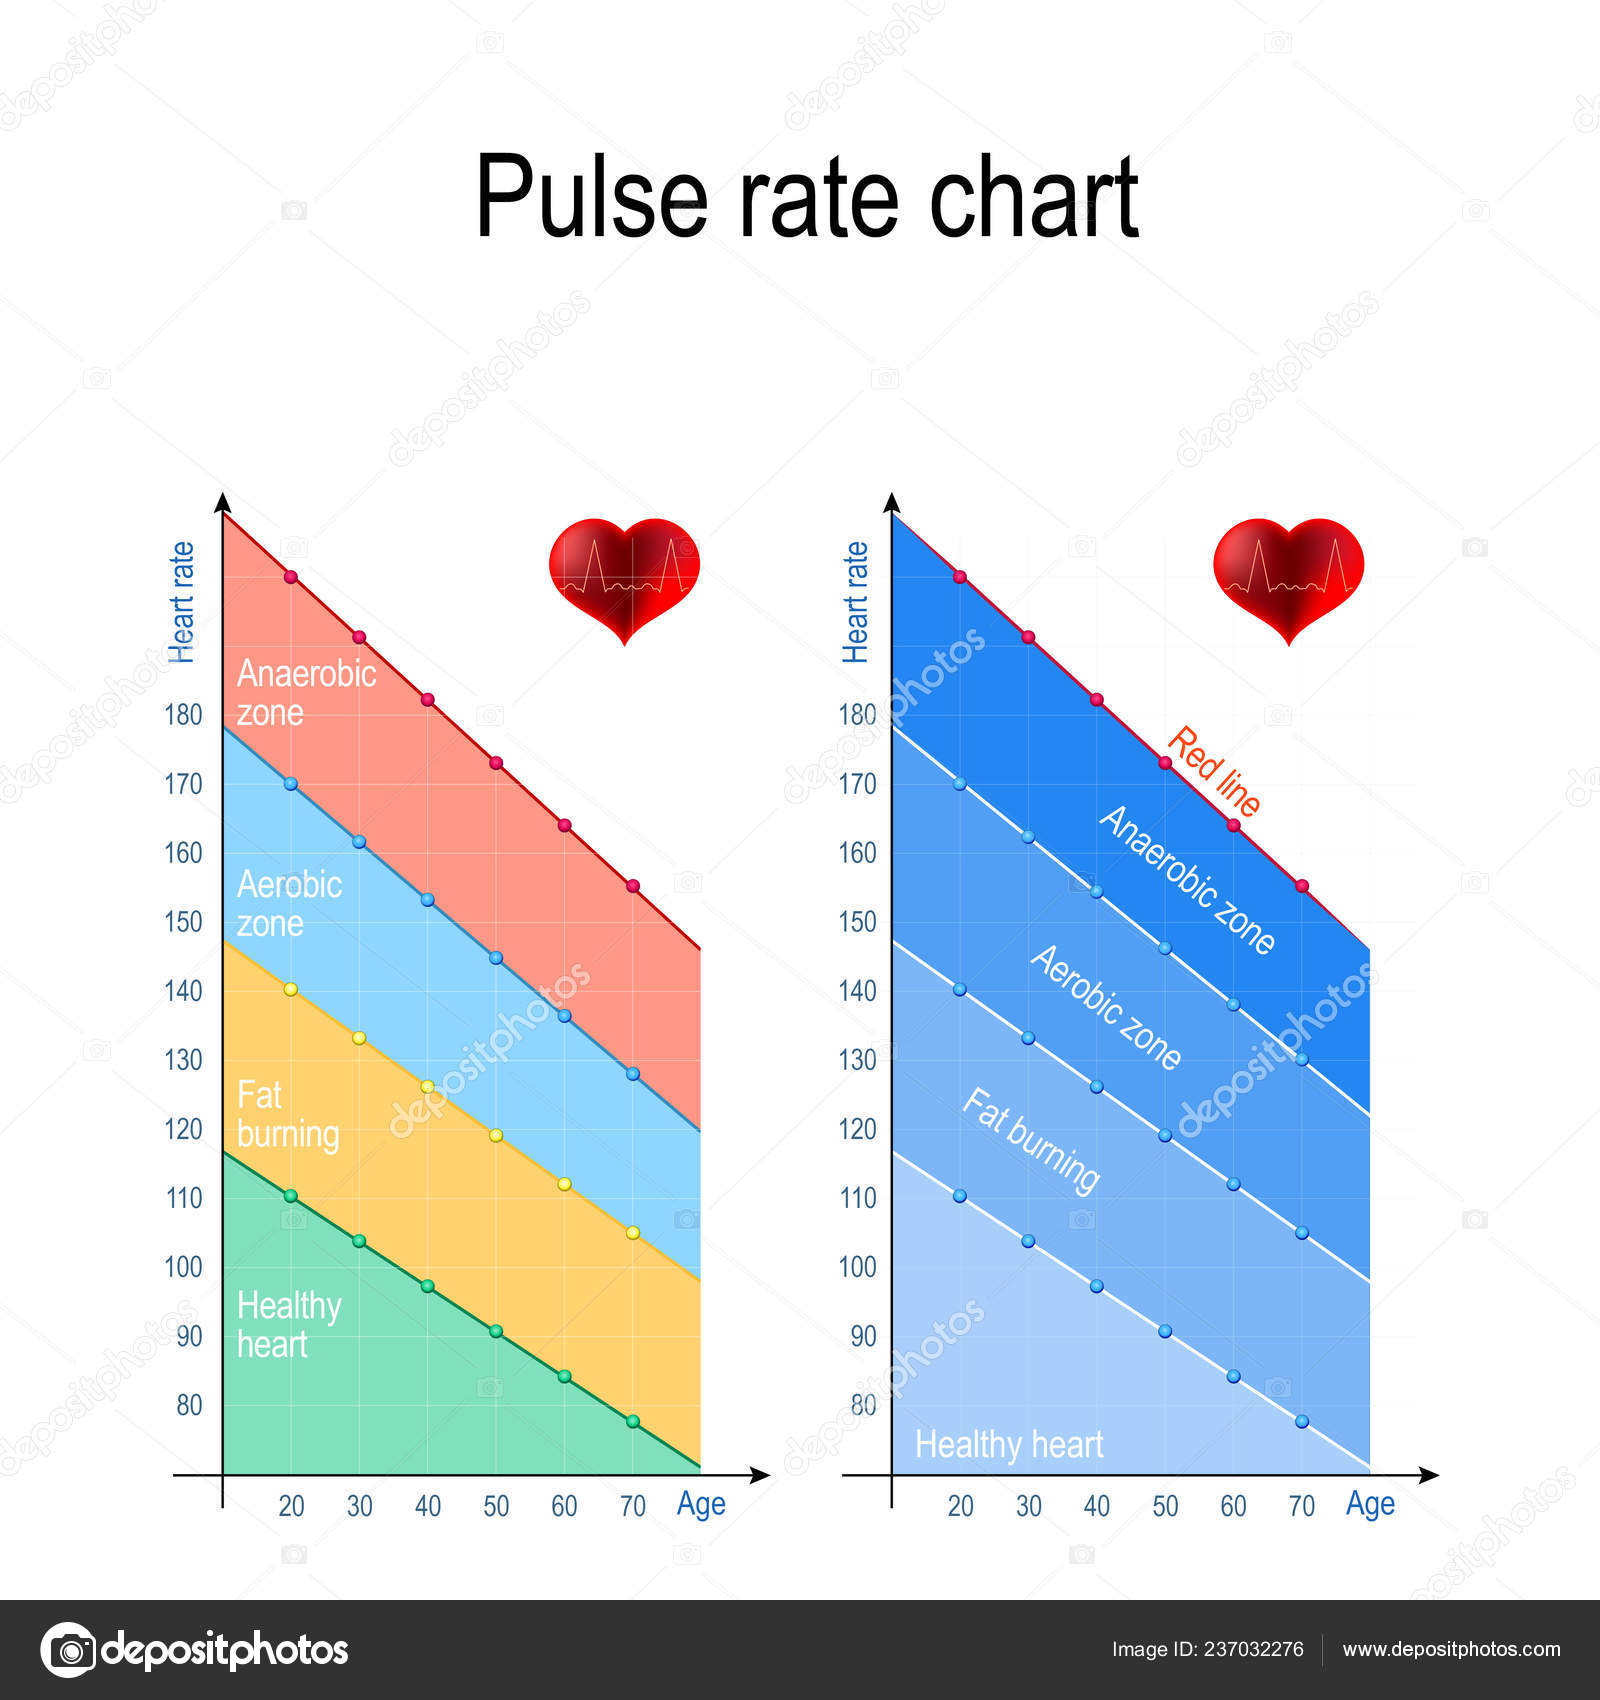 Normal Resting Heart Rate Chart